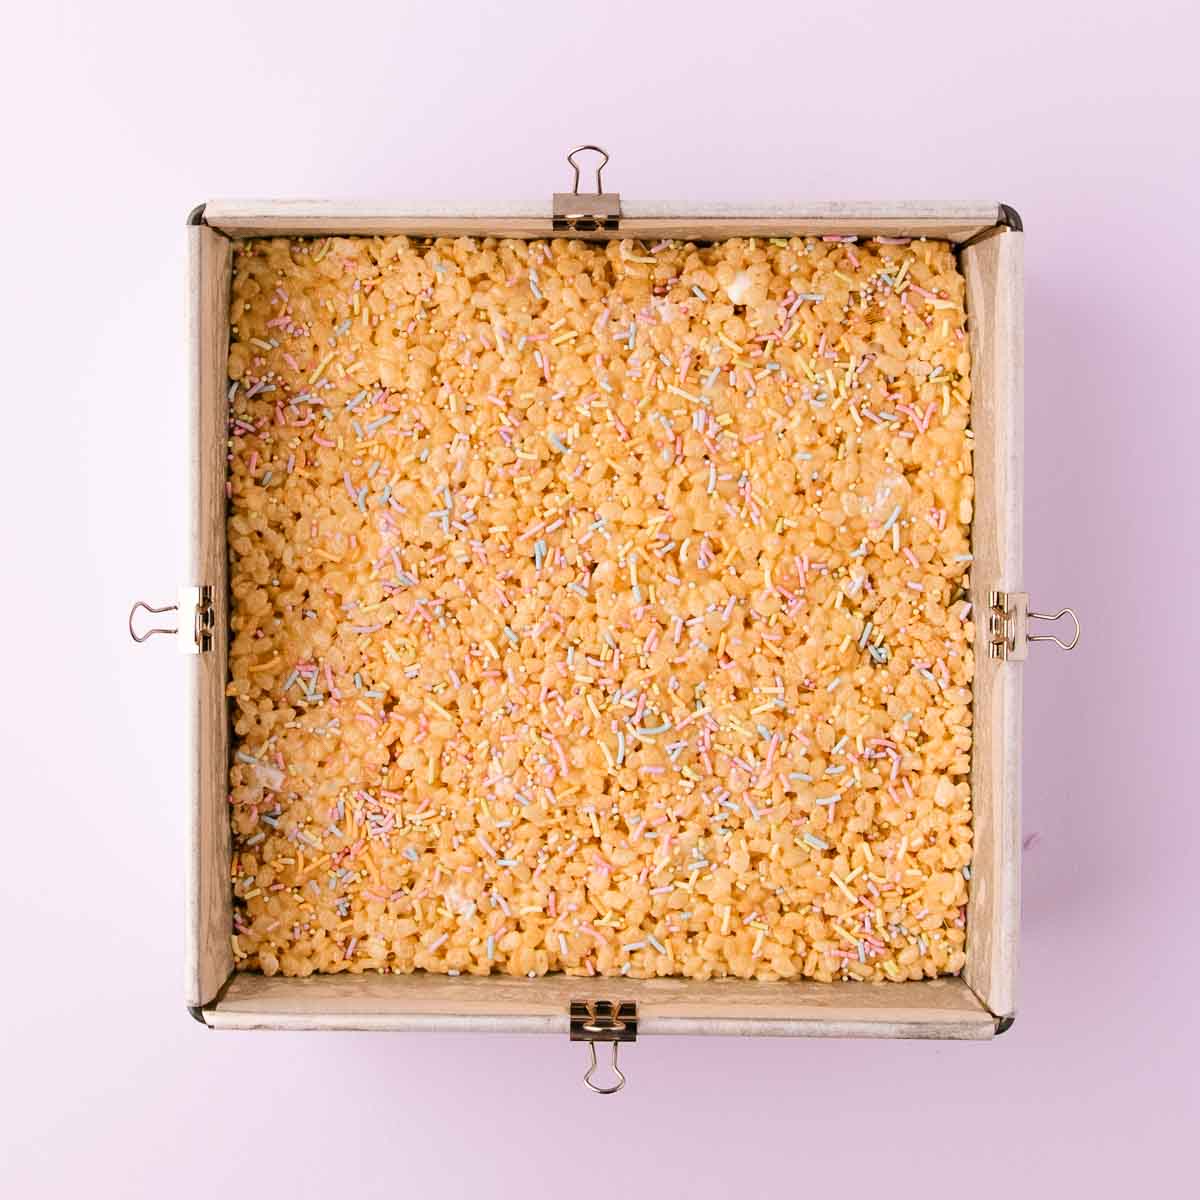 The mixture pressed into an even layer in the square pan, and sprinkled with pastel sprinkles.